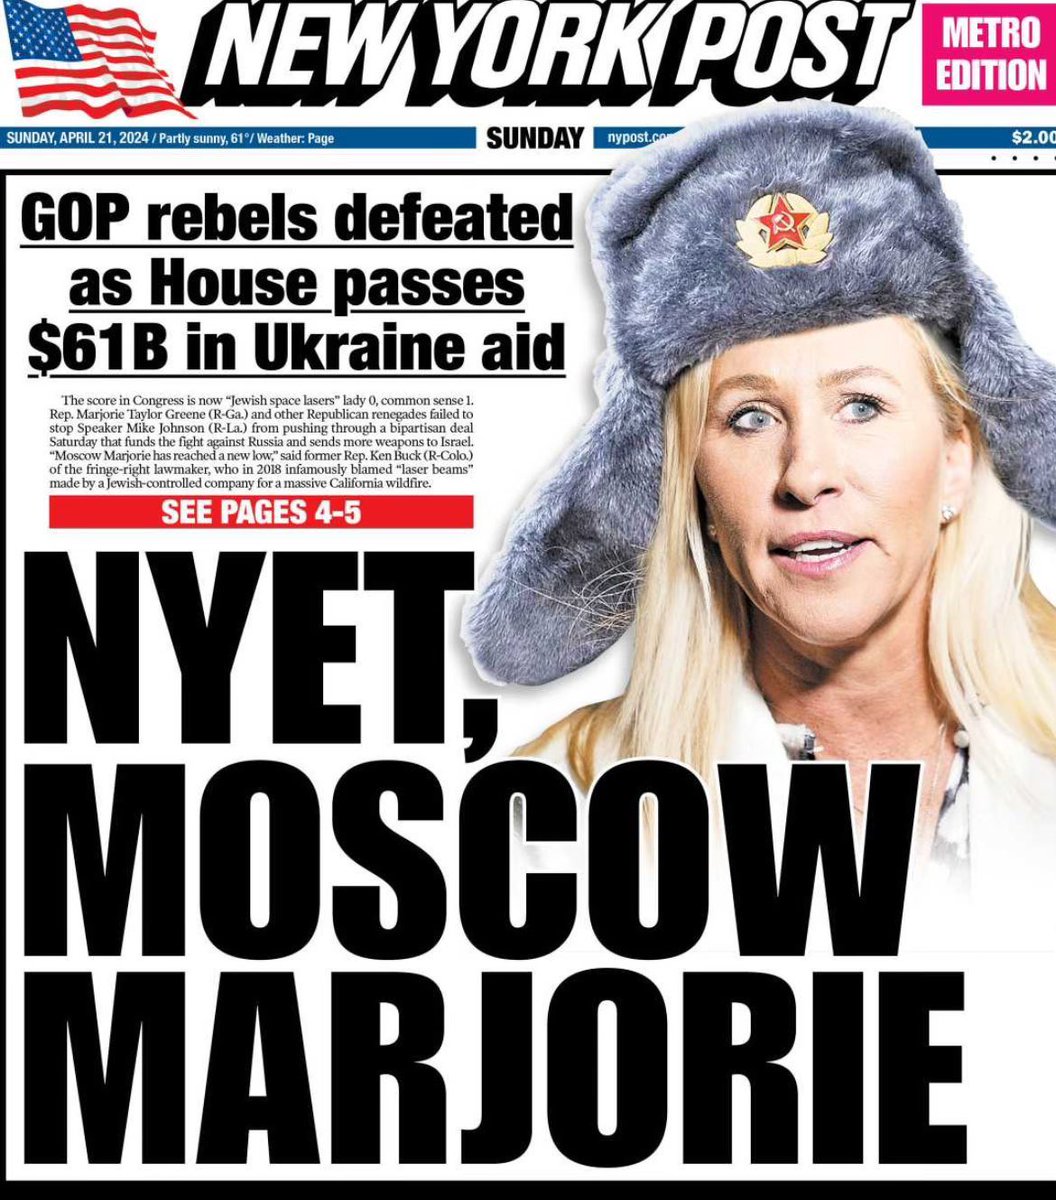 This is your friendly reminder that @MTGreenee does not like being referred to as #MoscowMarge. Please be better than the @NYPost and DO NOT tweet or like this. Thank you for your time. 🙏